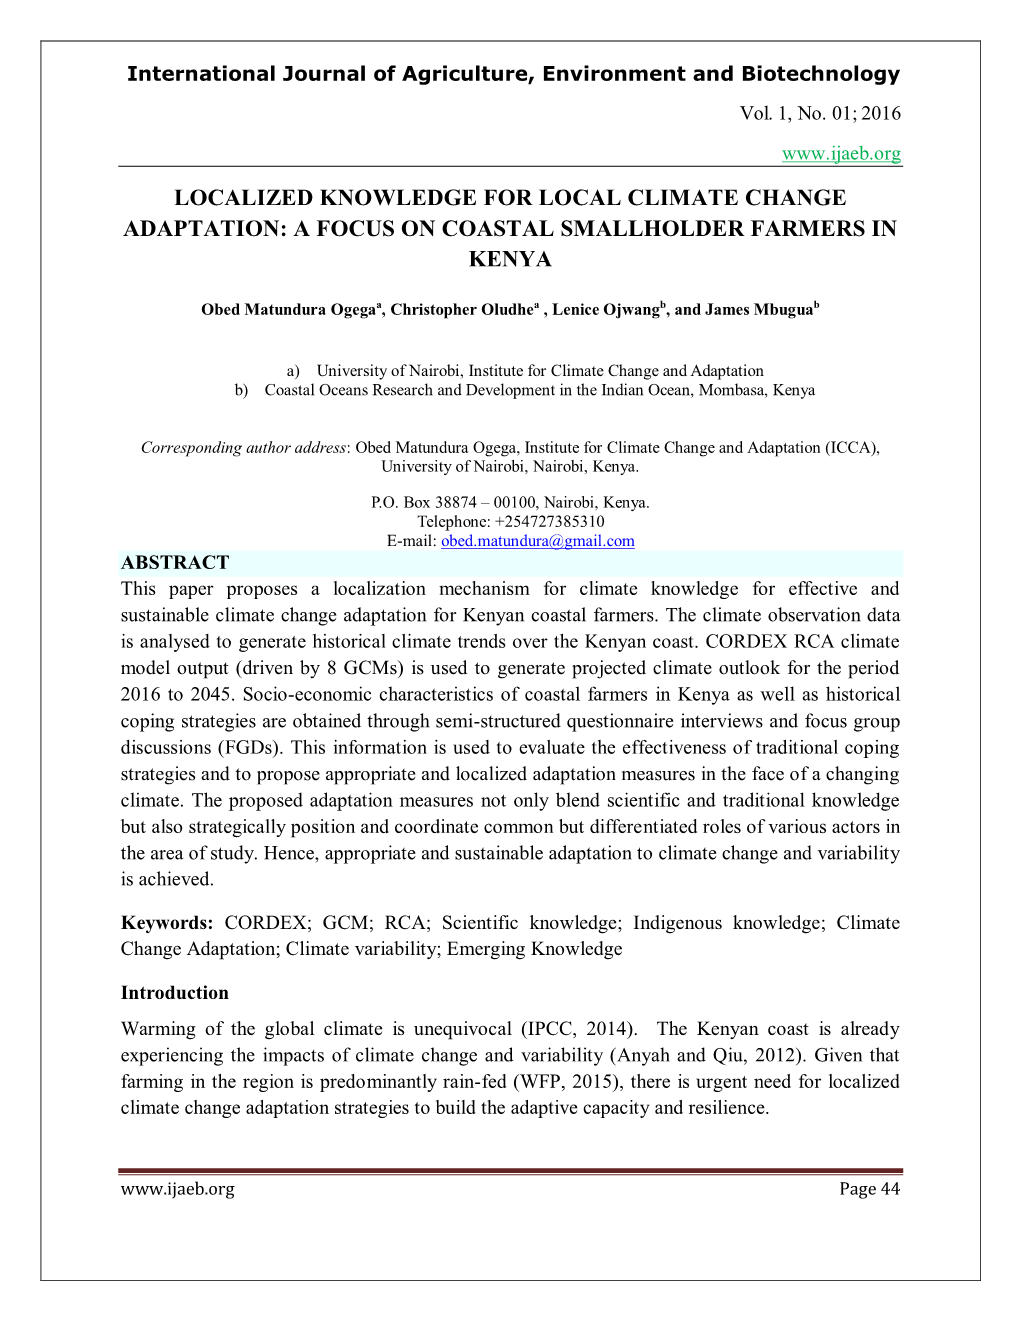 Localized Knowledge for Local Climate Change Adaptation: a Focus on Coastal Smallholder Farmers in Kenya